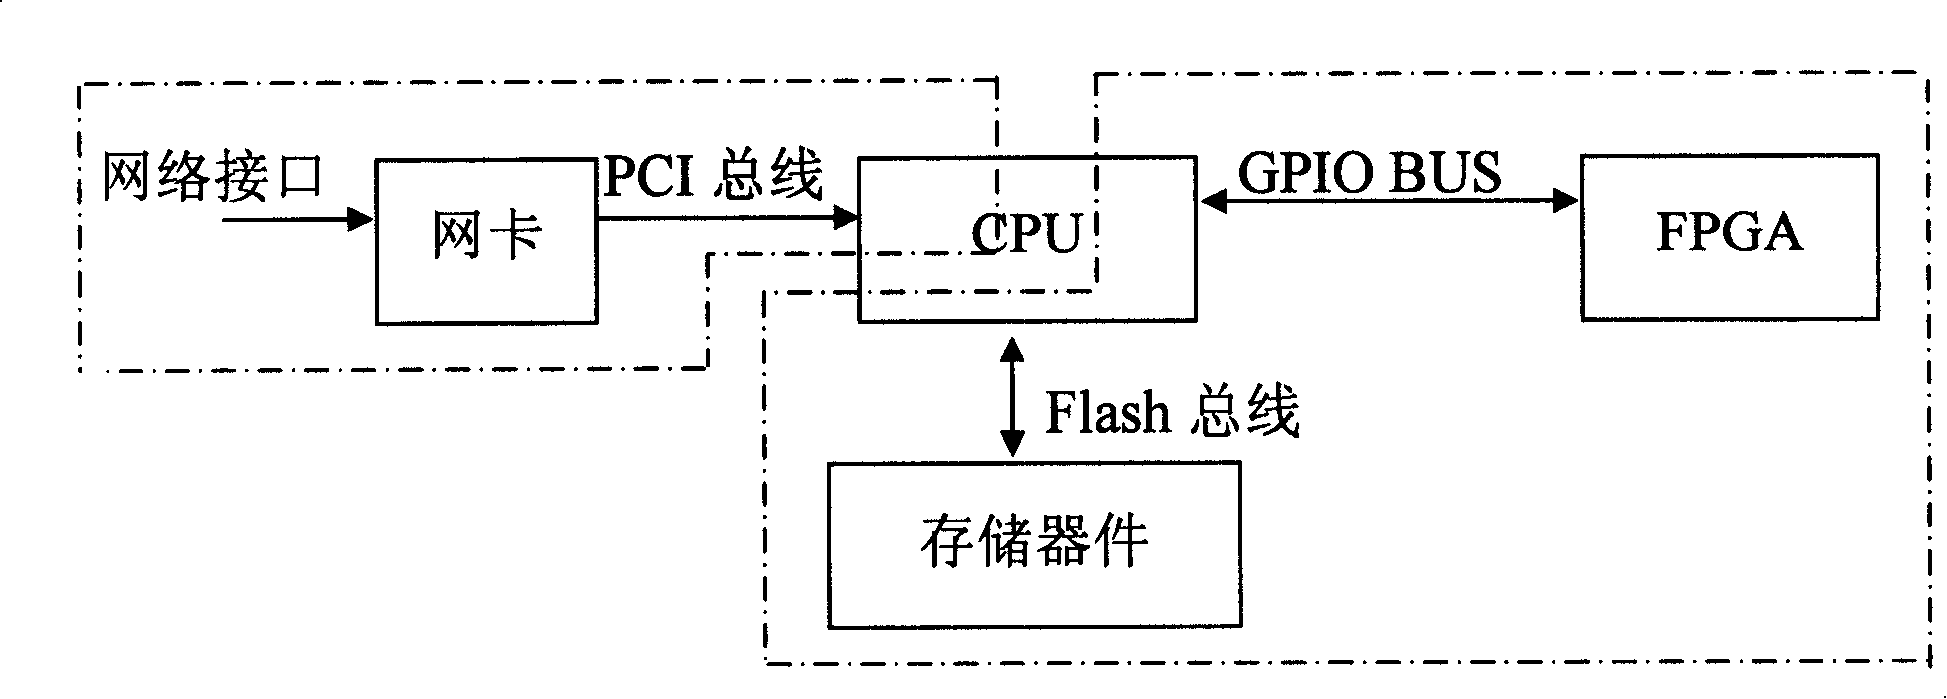 FPGA automatic downloading and on-line upgrading process